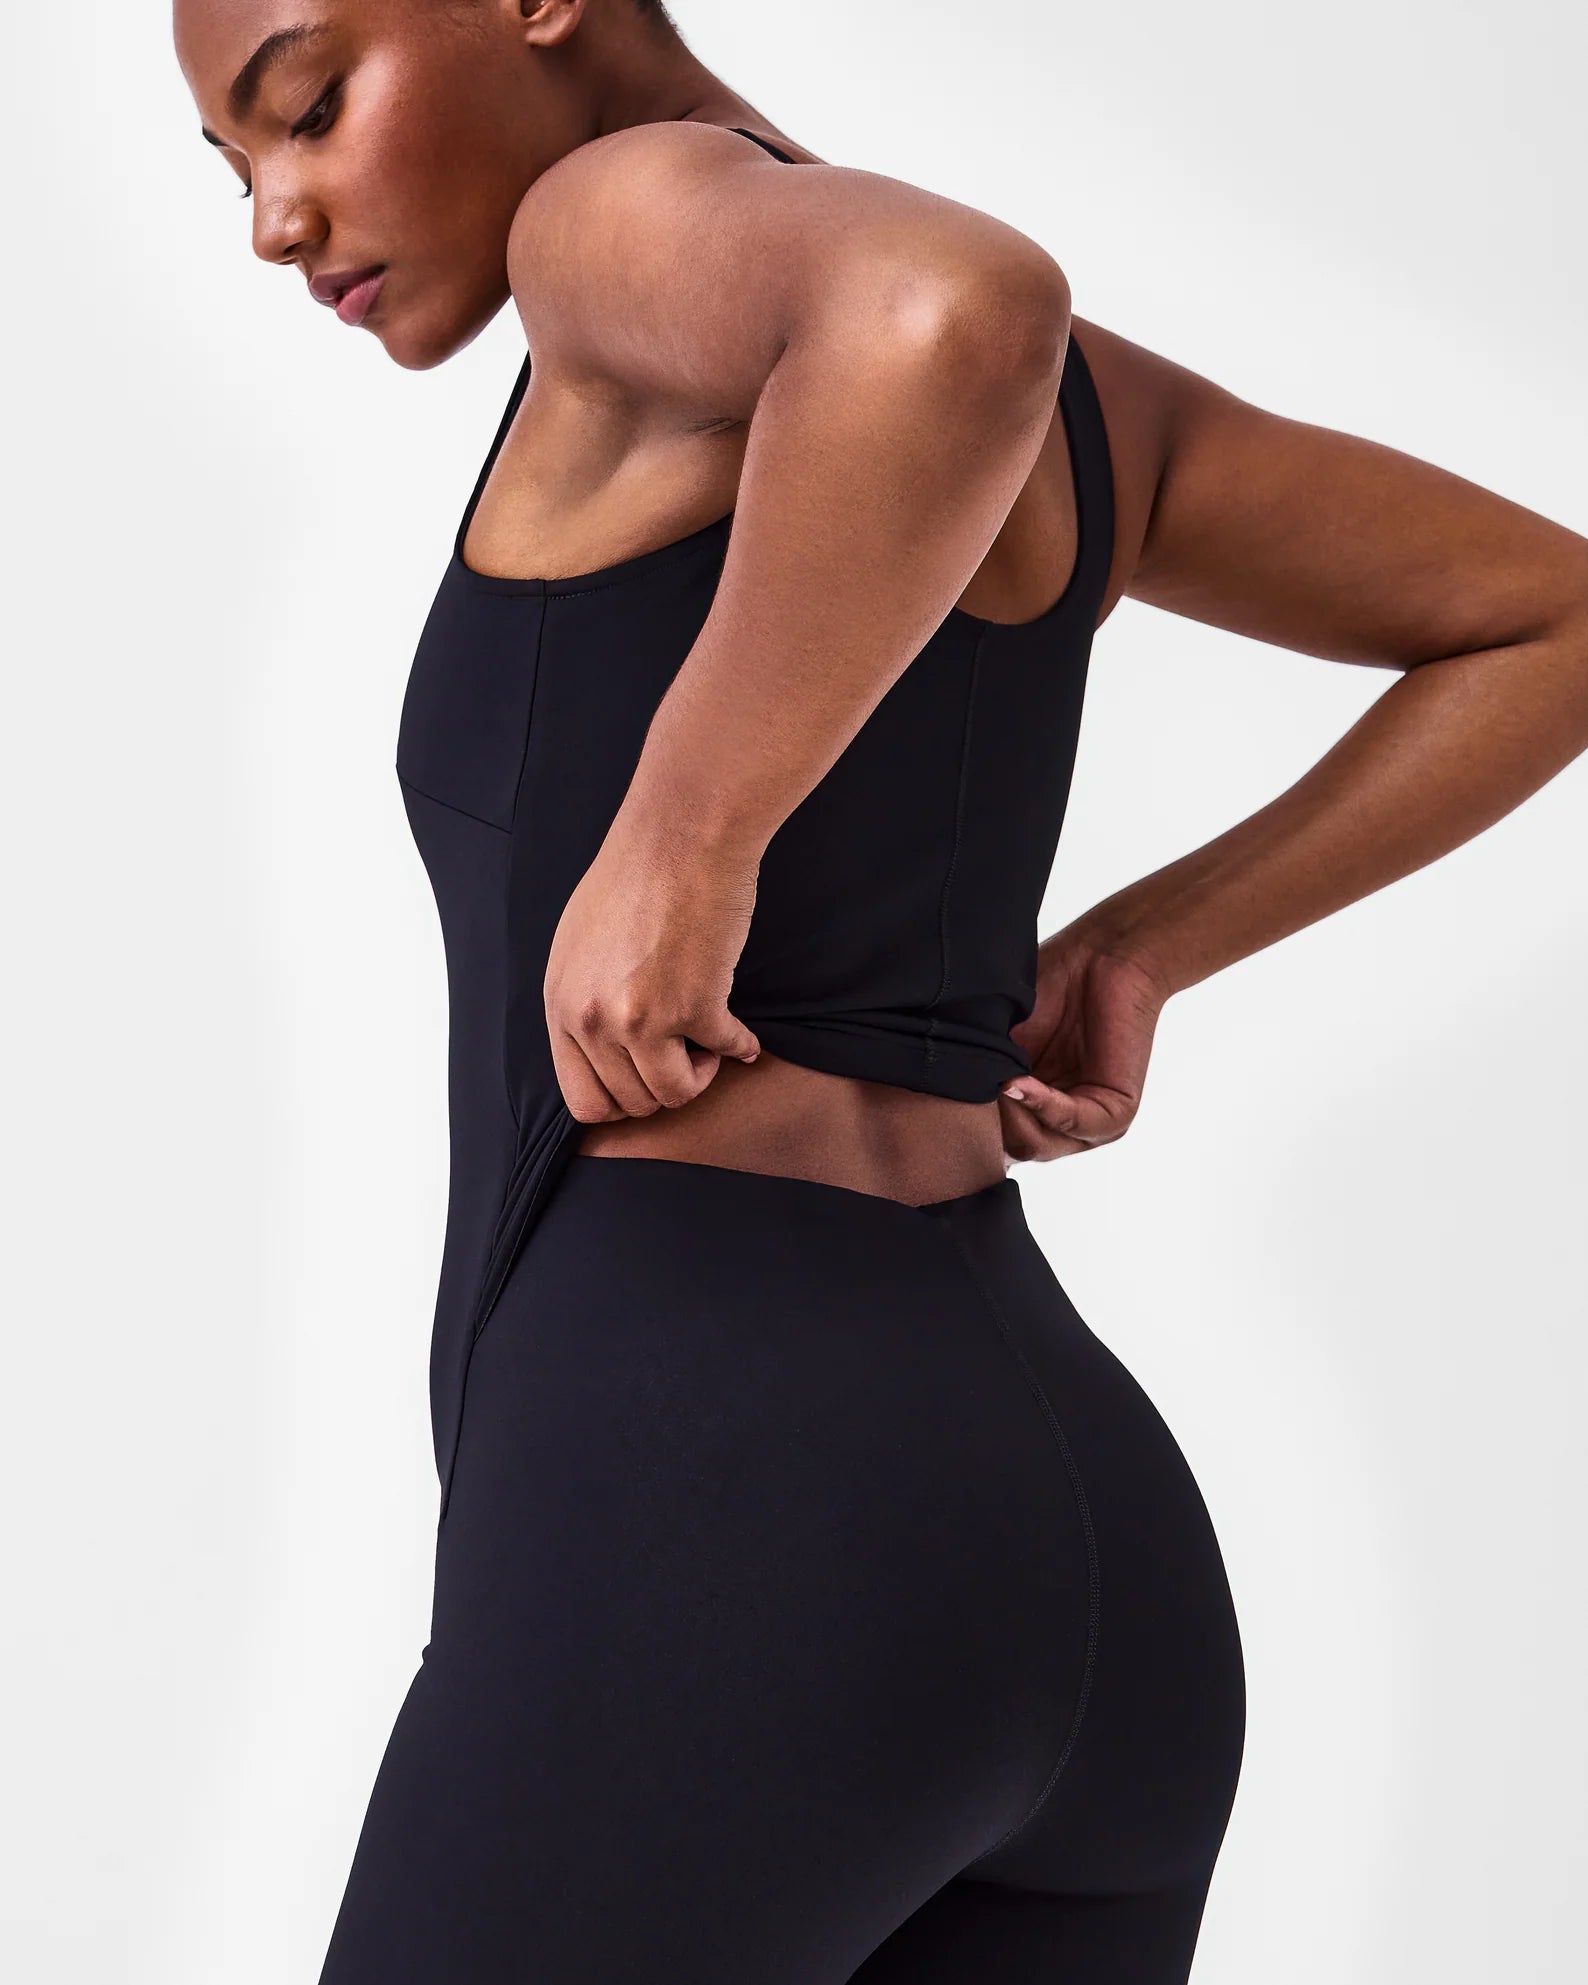 Booty Boost® Active Flare Jumpsuit